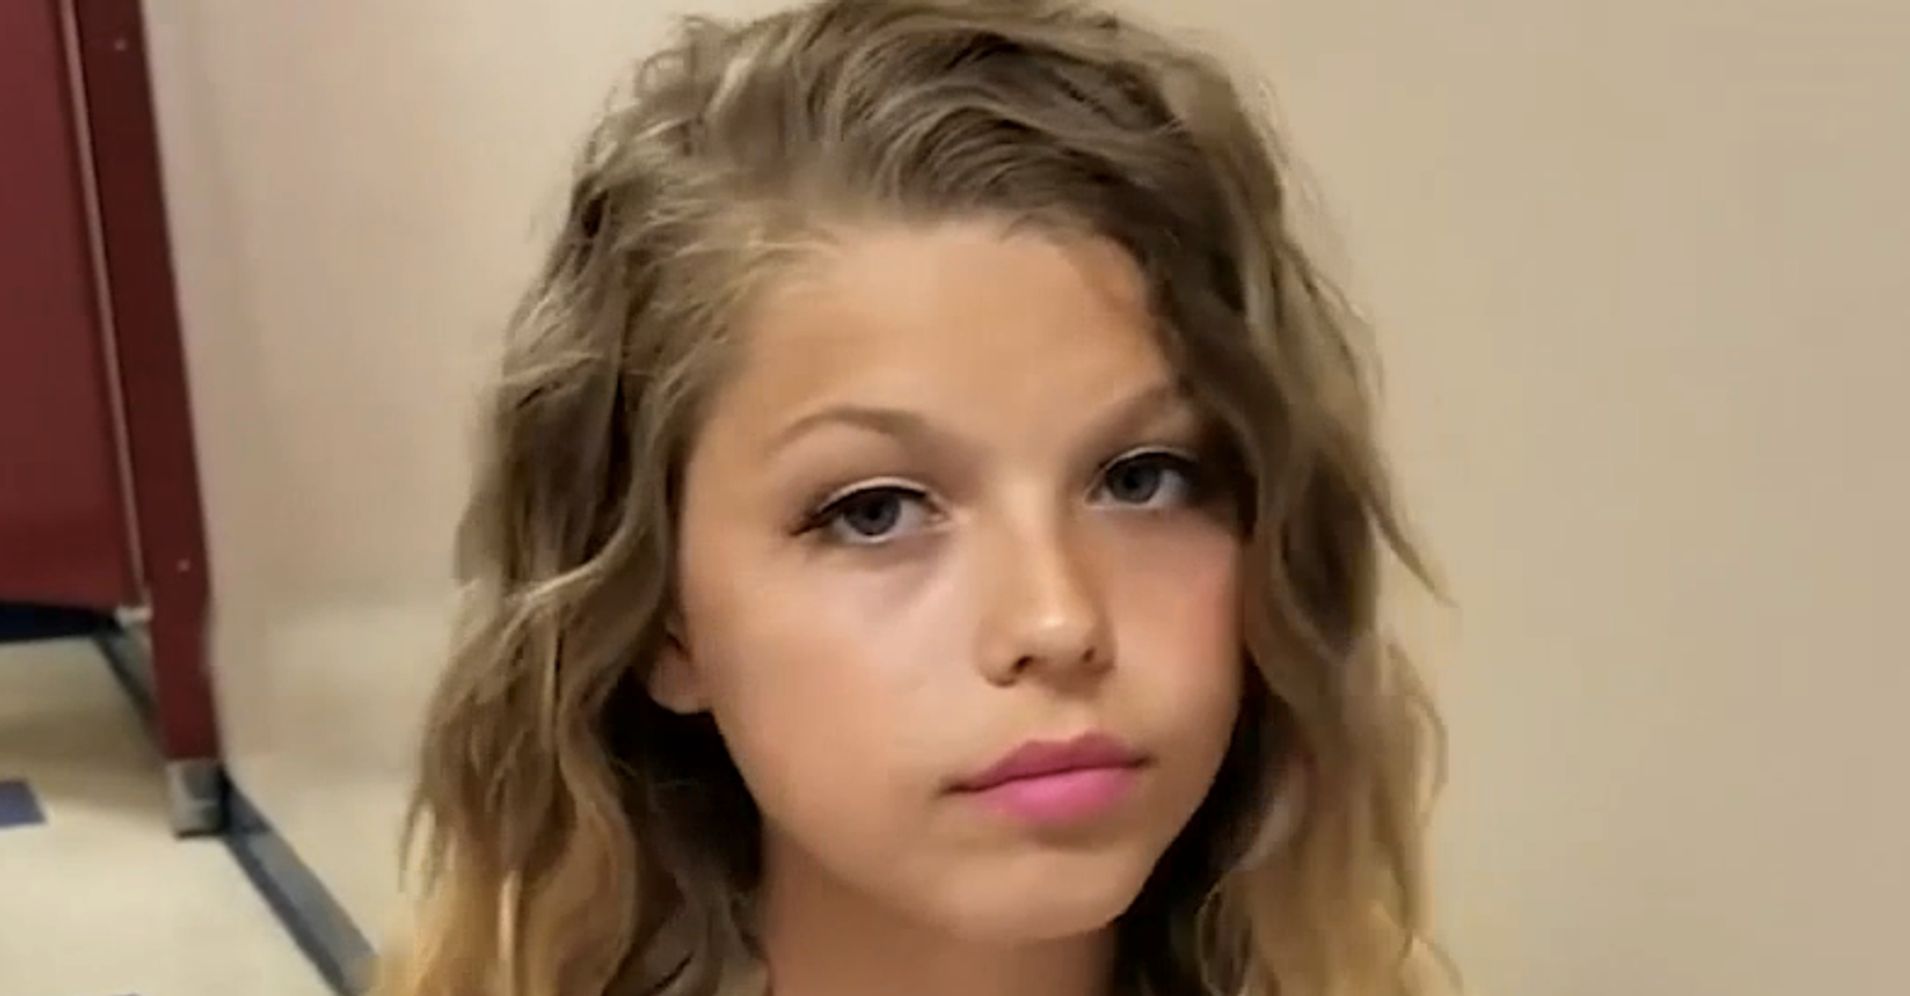 Trans Teen Gets Personal About Being Bullied In Powerful Viral Video